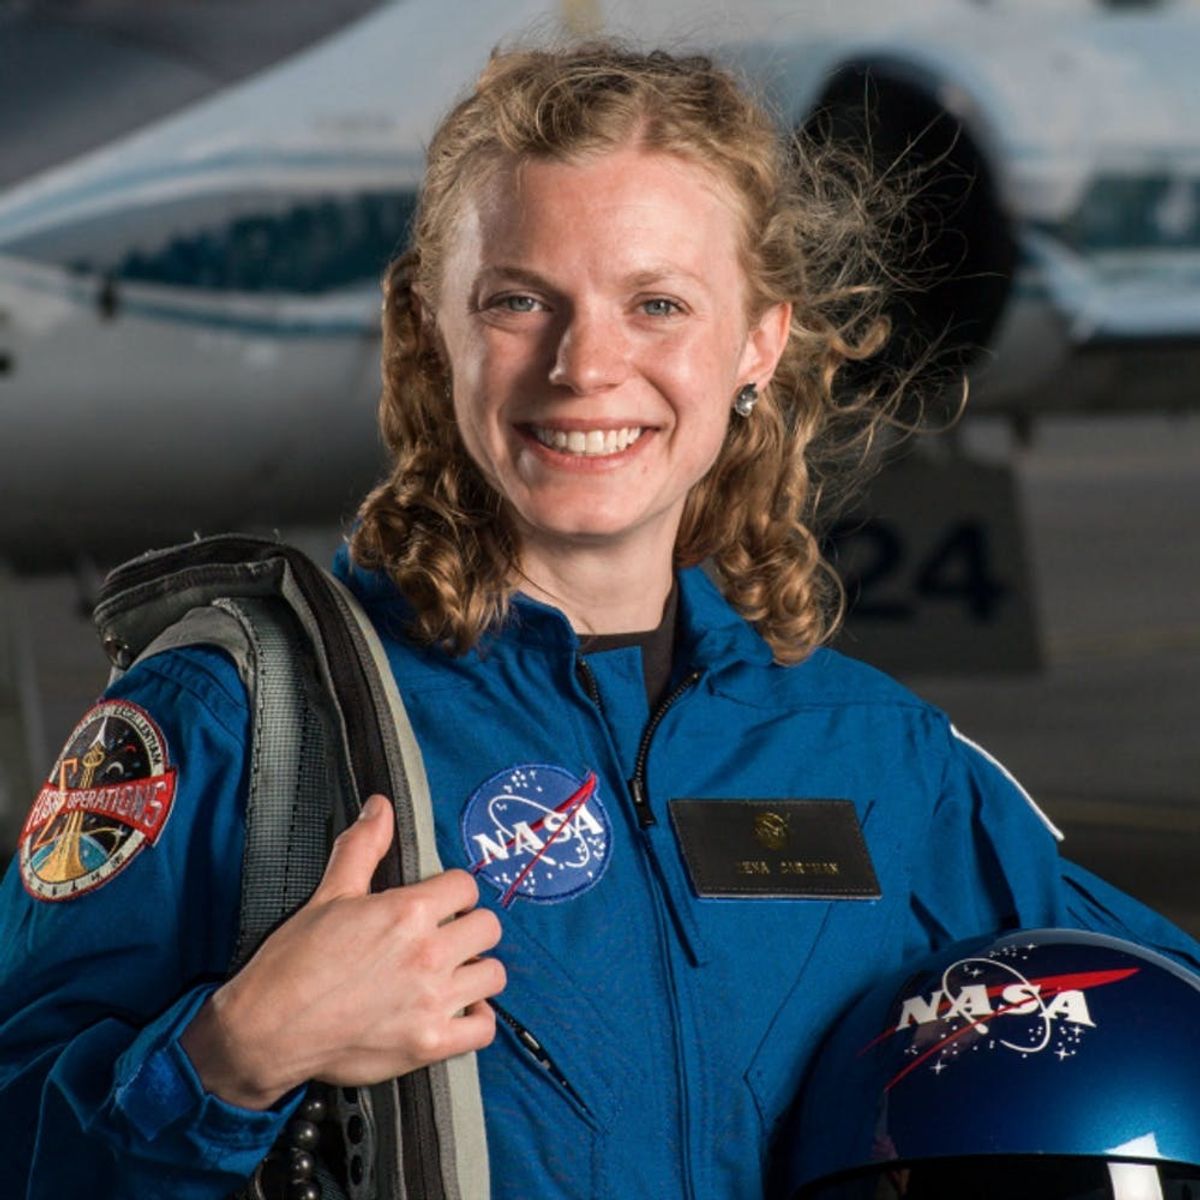 Meet the Next Female NASA Astronauts Looking to Conquer the Universe